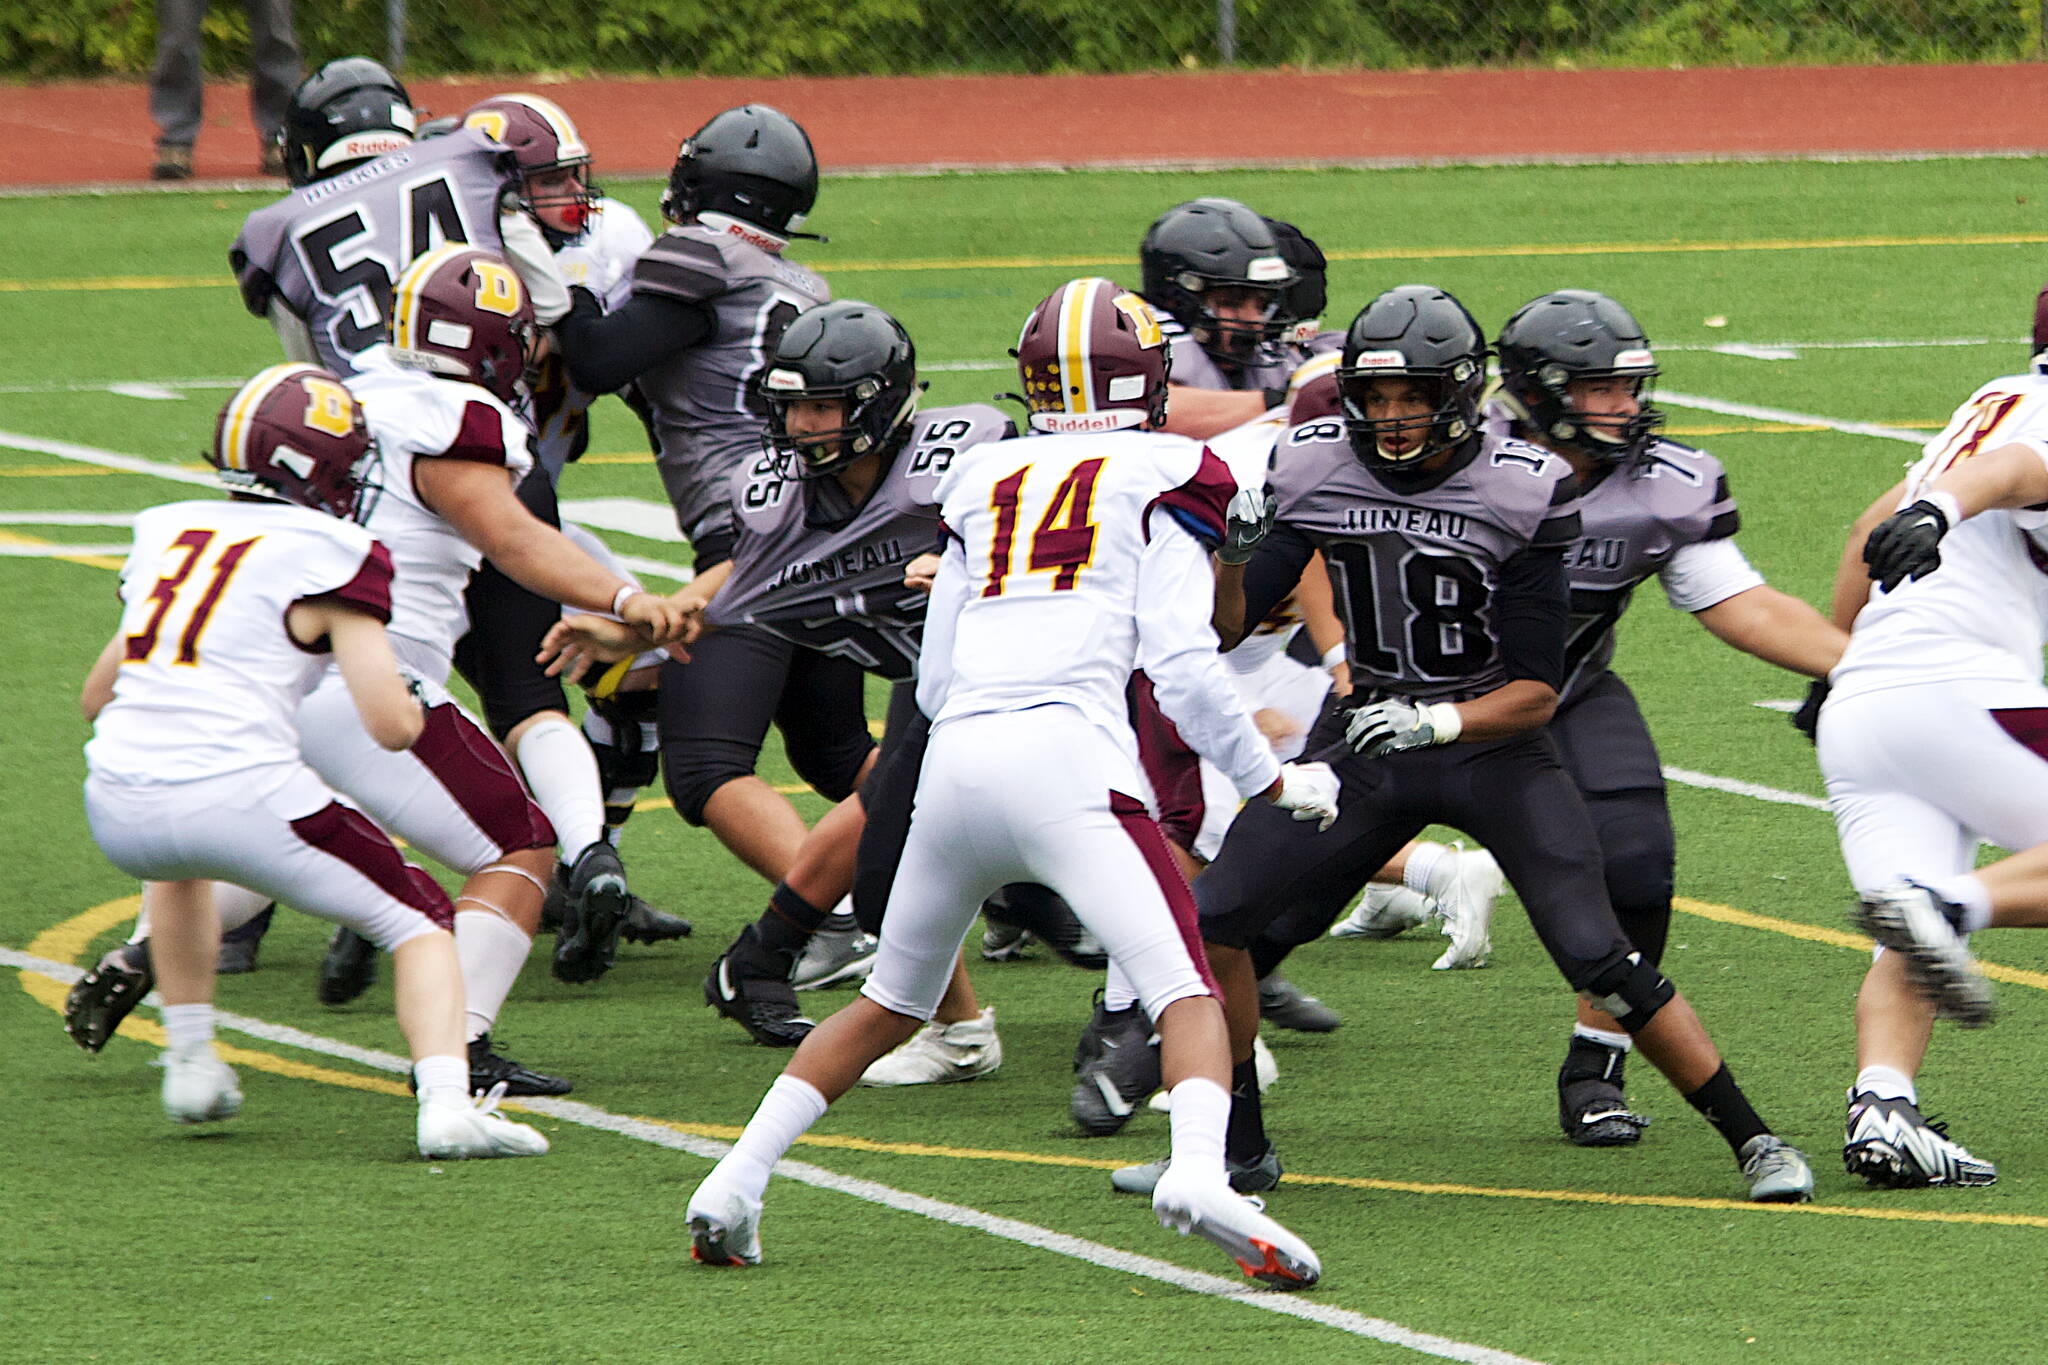 Juneau wide receiver Kenyon Jordan tries to block a Dimond High School defender as lineman Walter Haube-Law (55) is grabbed by the jersey Saturday afternoon at Adair-Kennedy Field. (Mark Sabbatini / Juneau Empire)